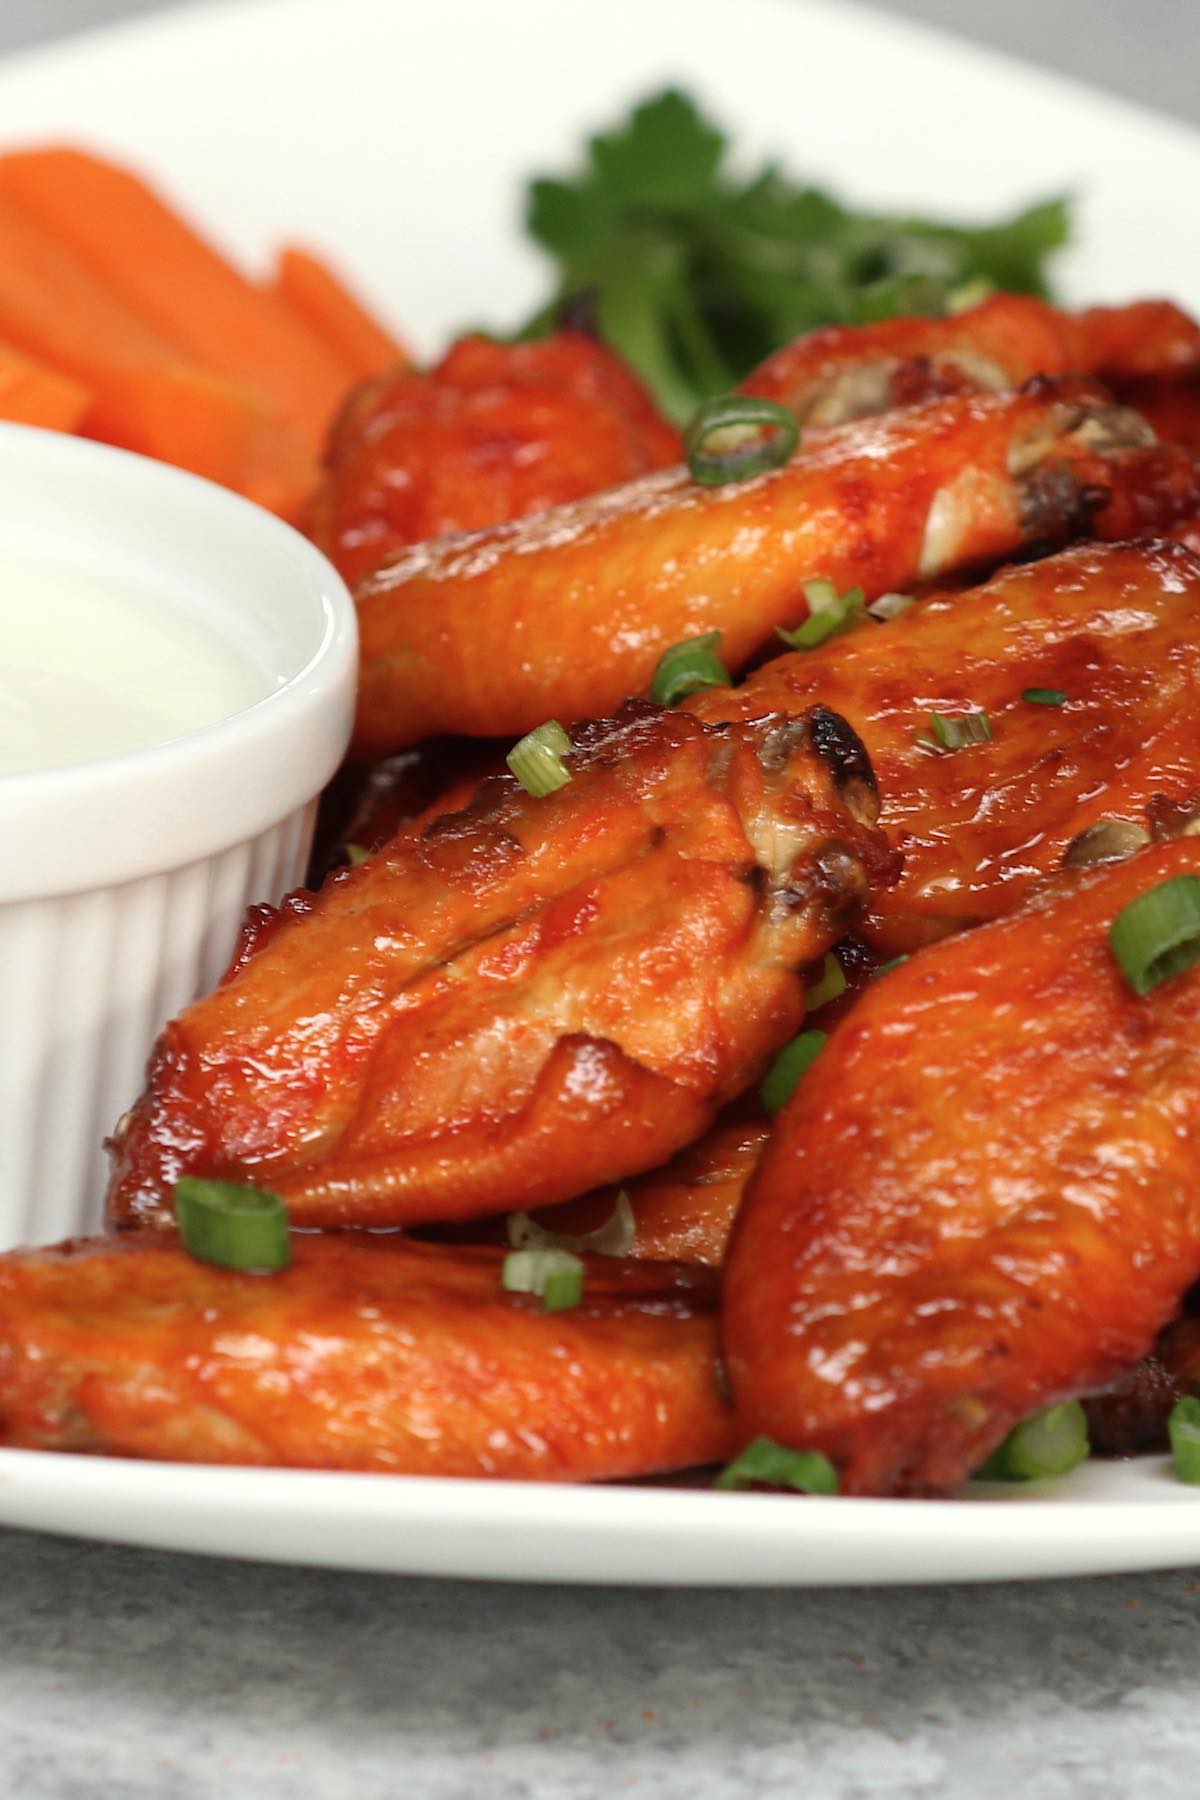 Crispy chicken wings served with ranch dip on a white plate.